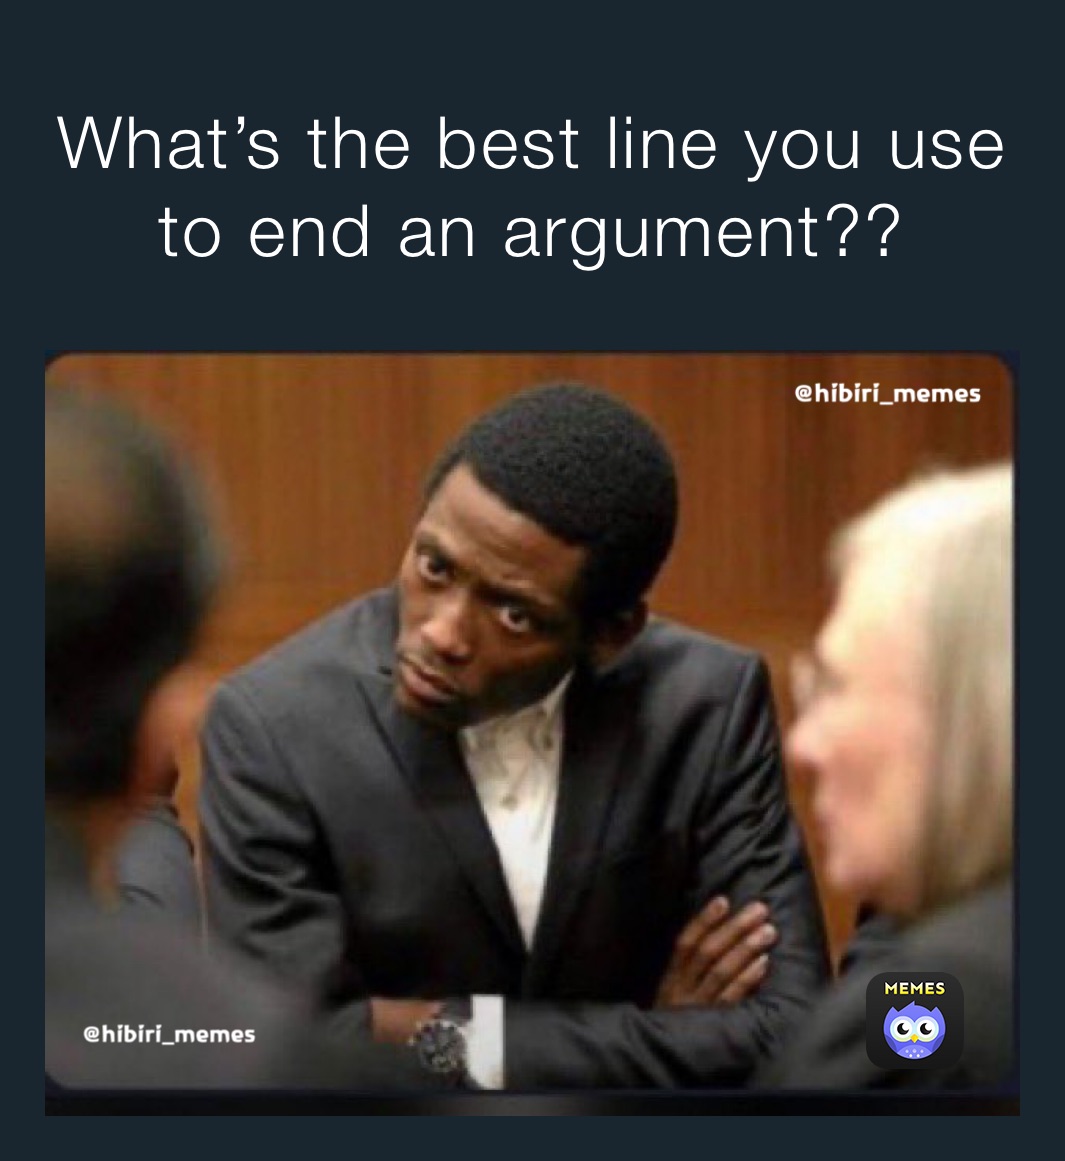 What’s the best line you use to end an argument??